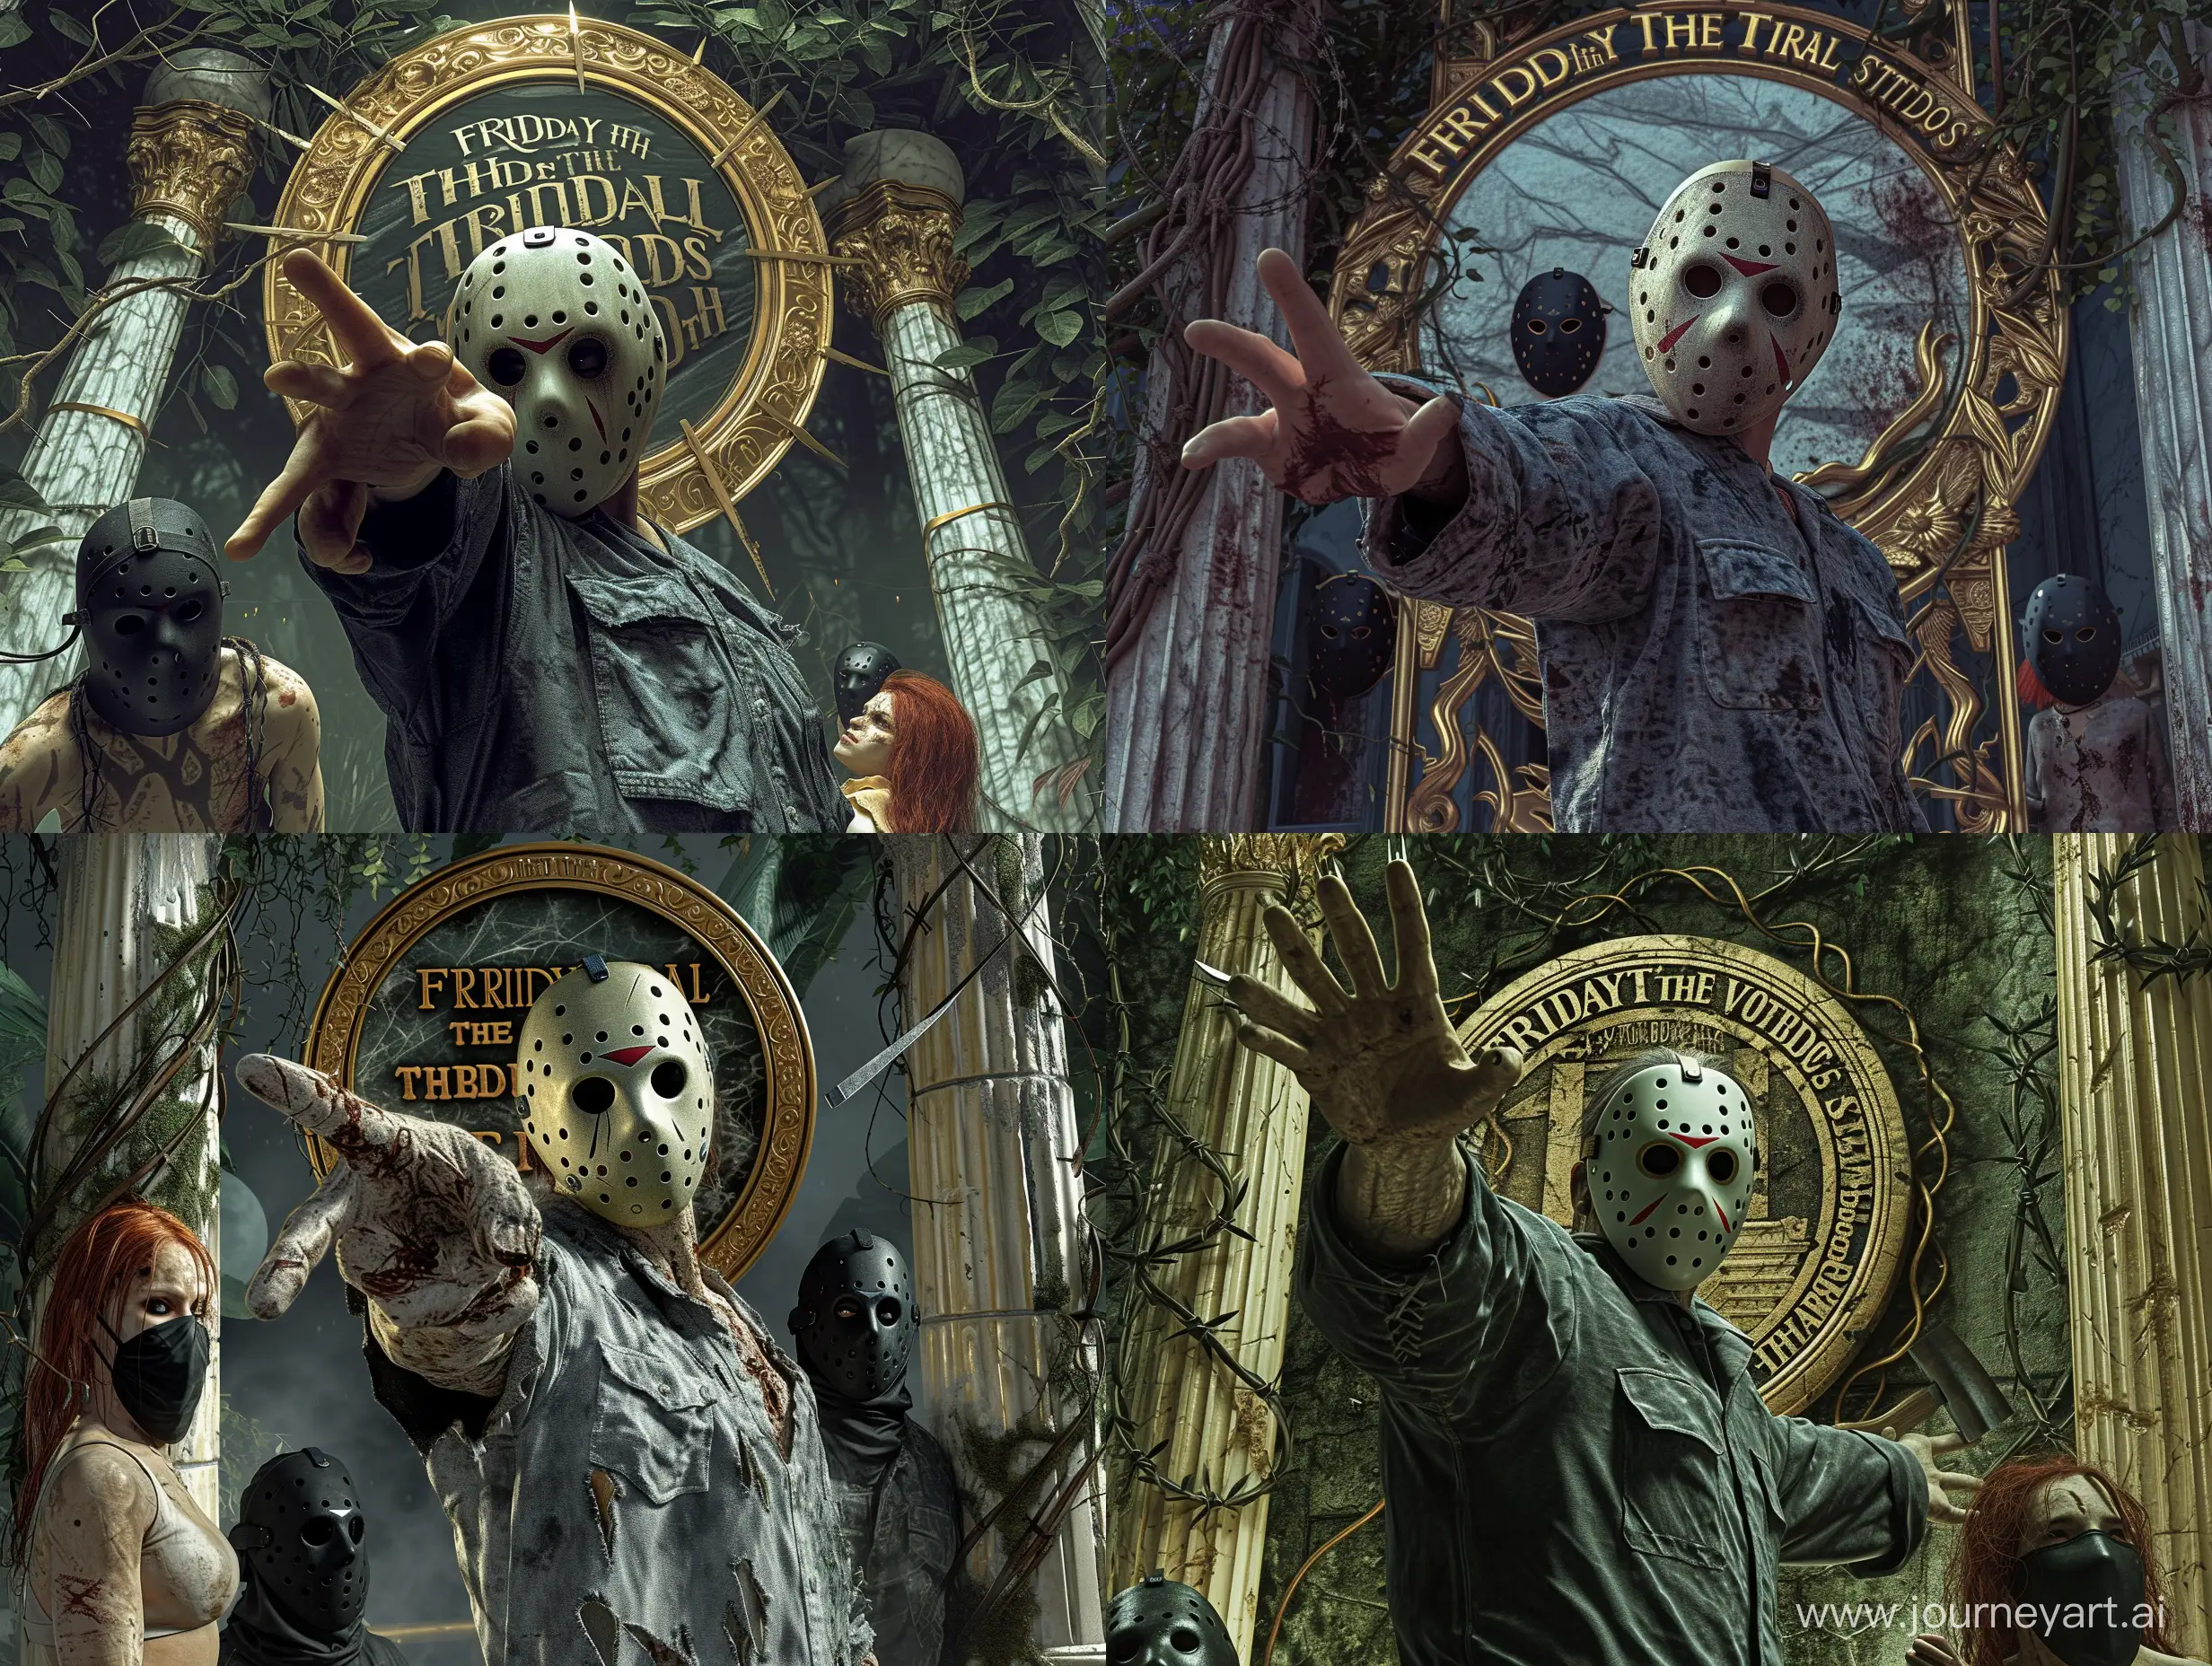 Friday-the-13th-Tribal-Studios-Sinister-Jungle-Encounter-with-Jason-Voorhees